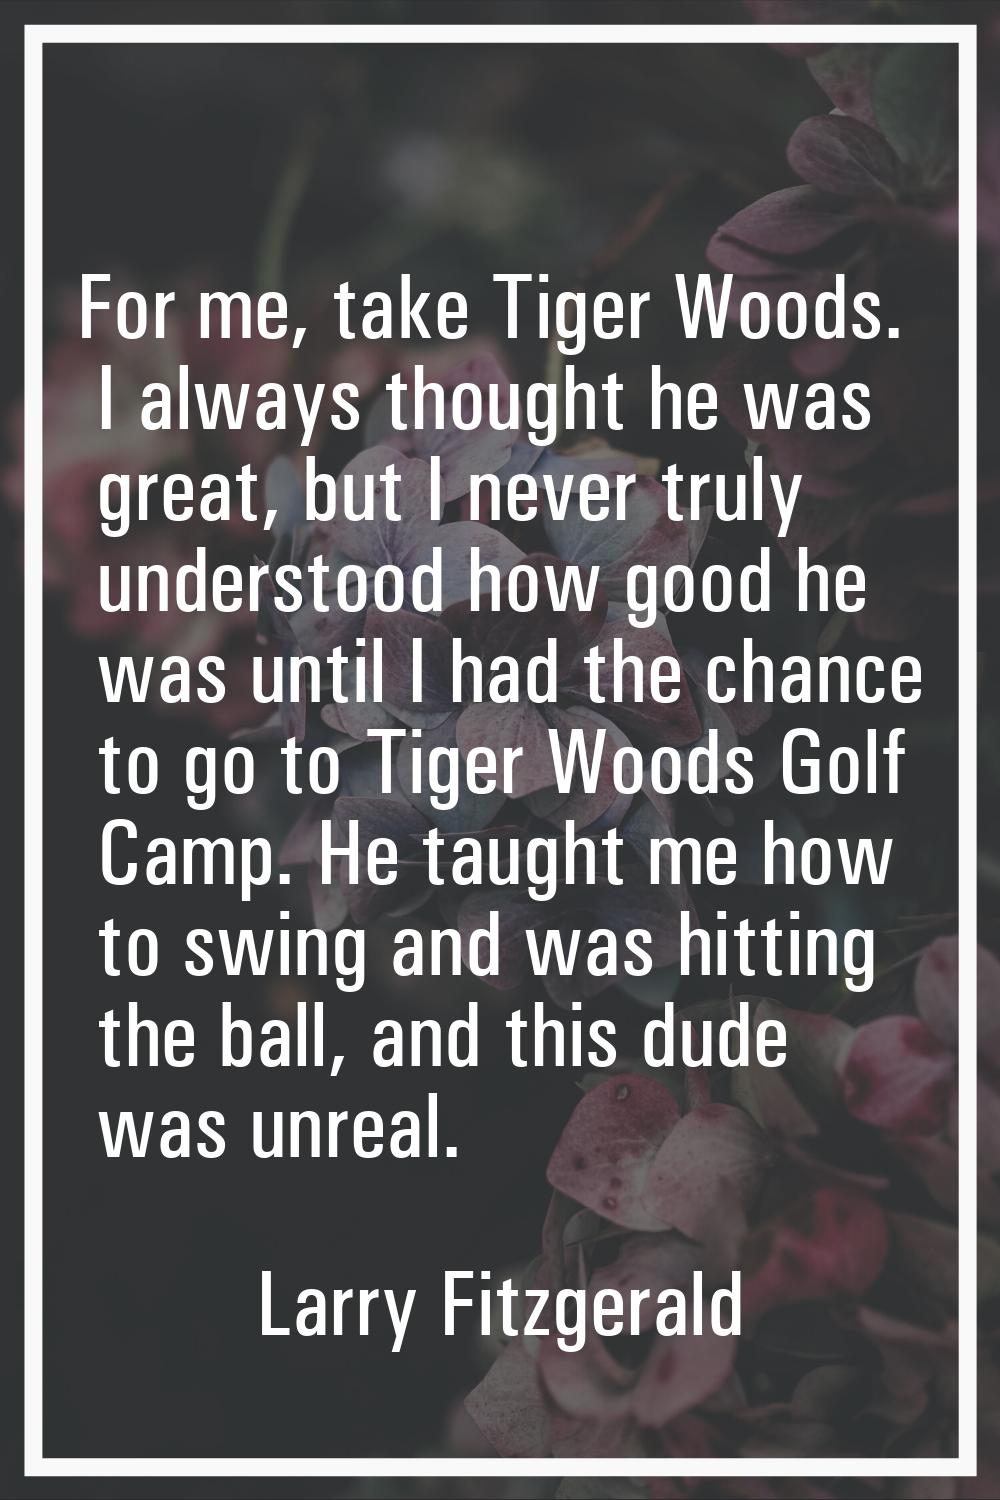 For me, take Tiger Woods. I always thought he was great, but I never truly understood how good he w